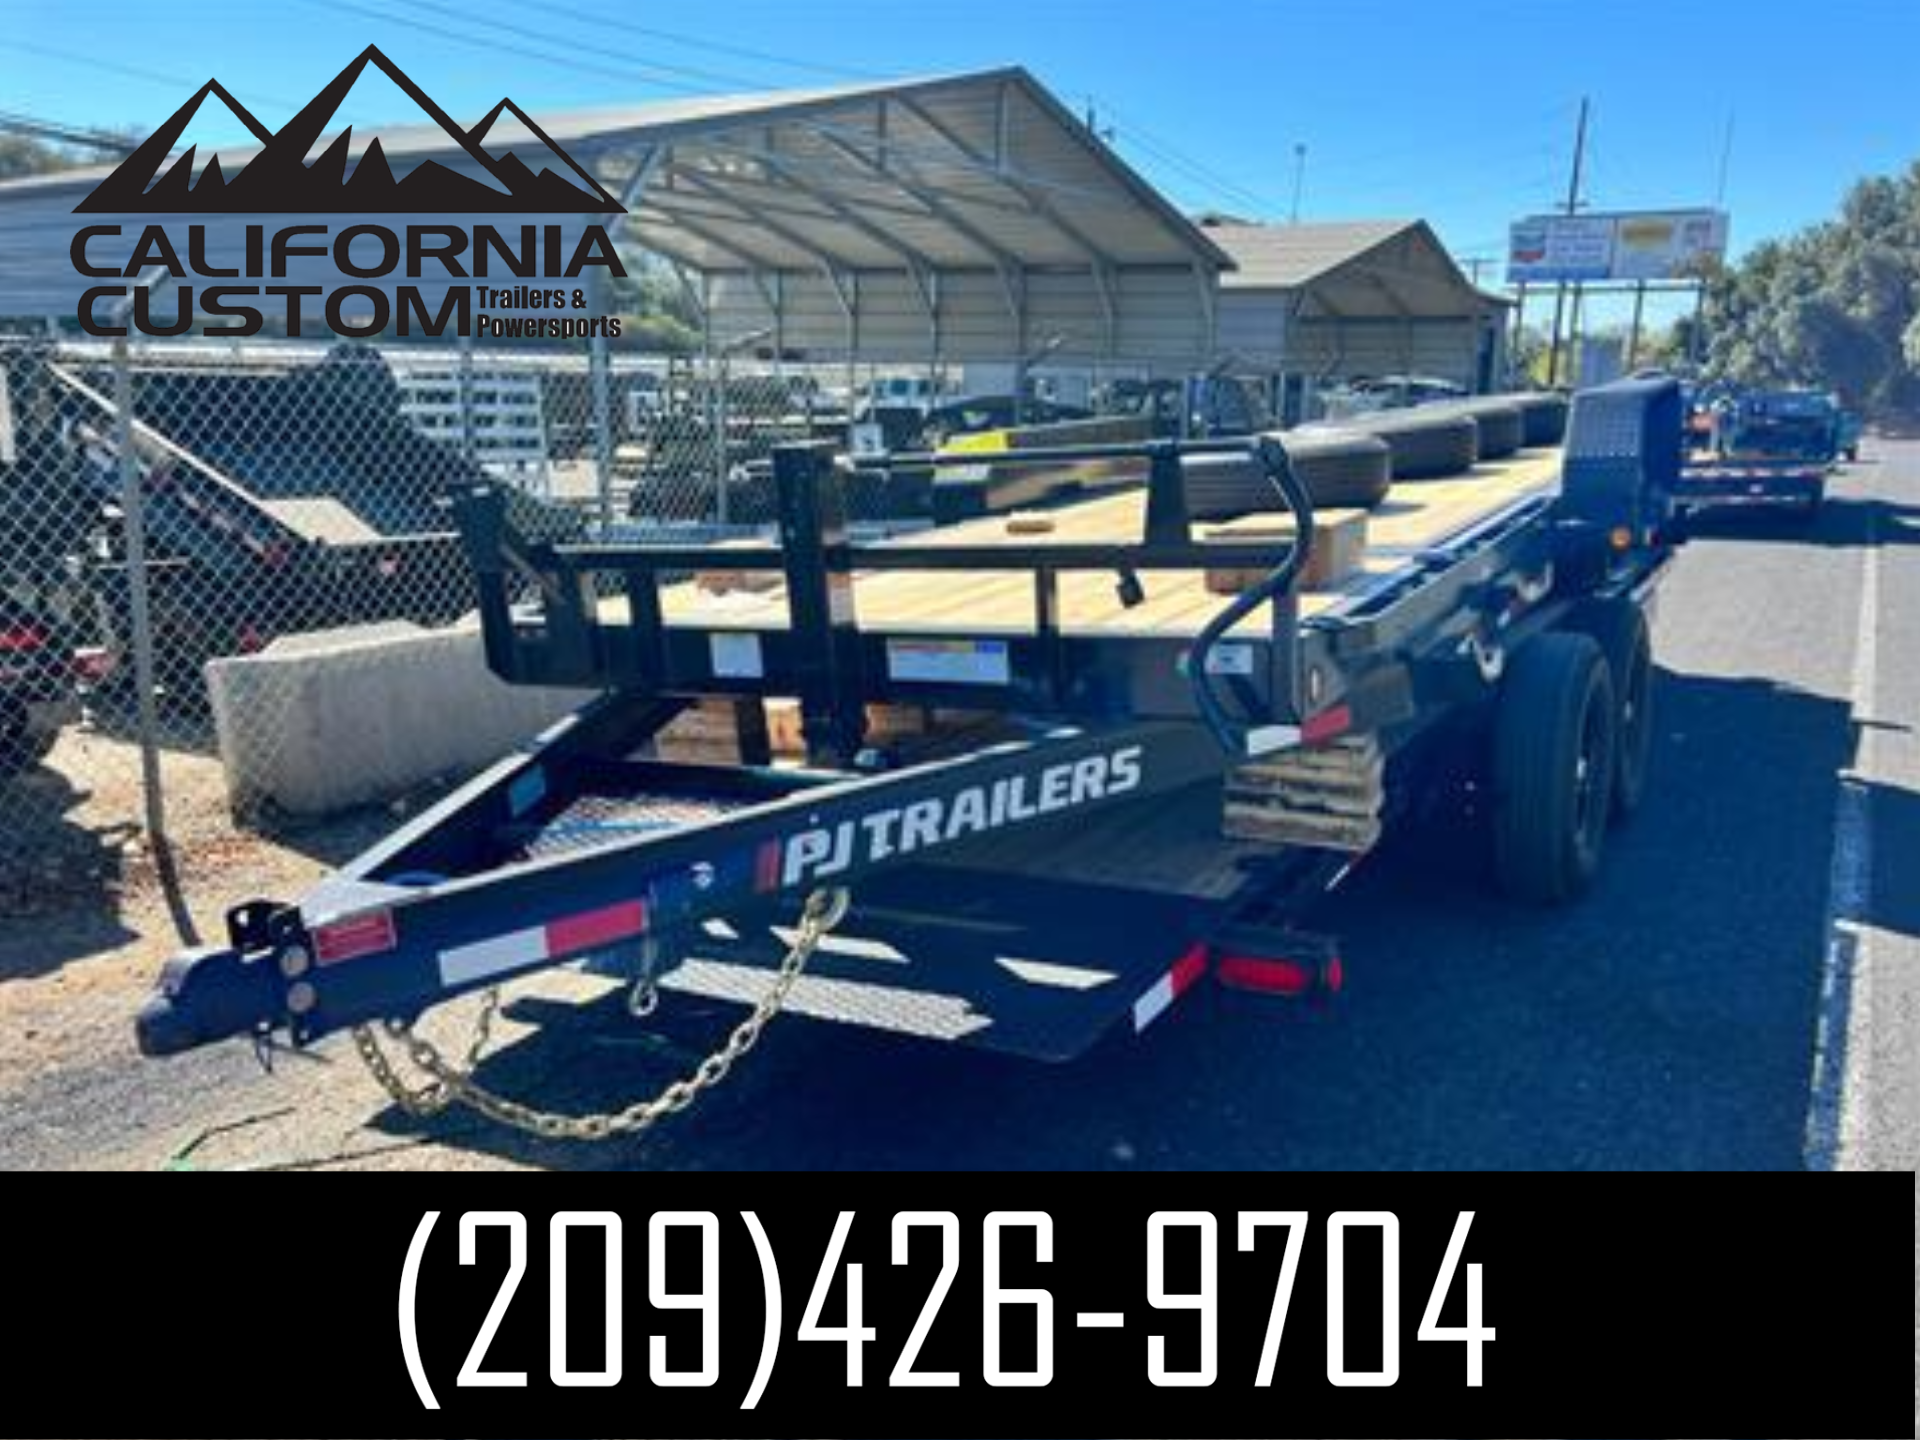 2023 PJ Trailers 6 in. Channel Equipment Tilt (T6) 20 ft. in Acampo, California - Photo 1